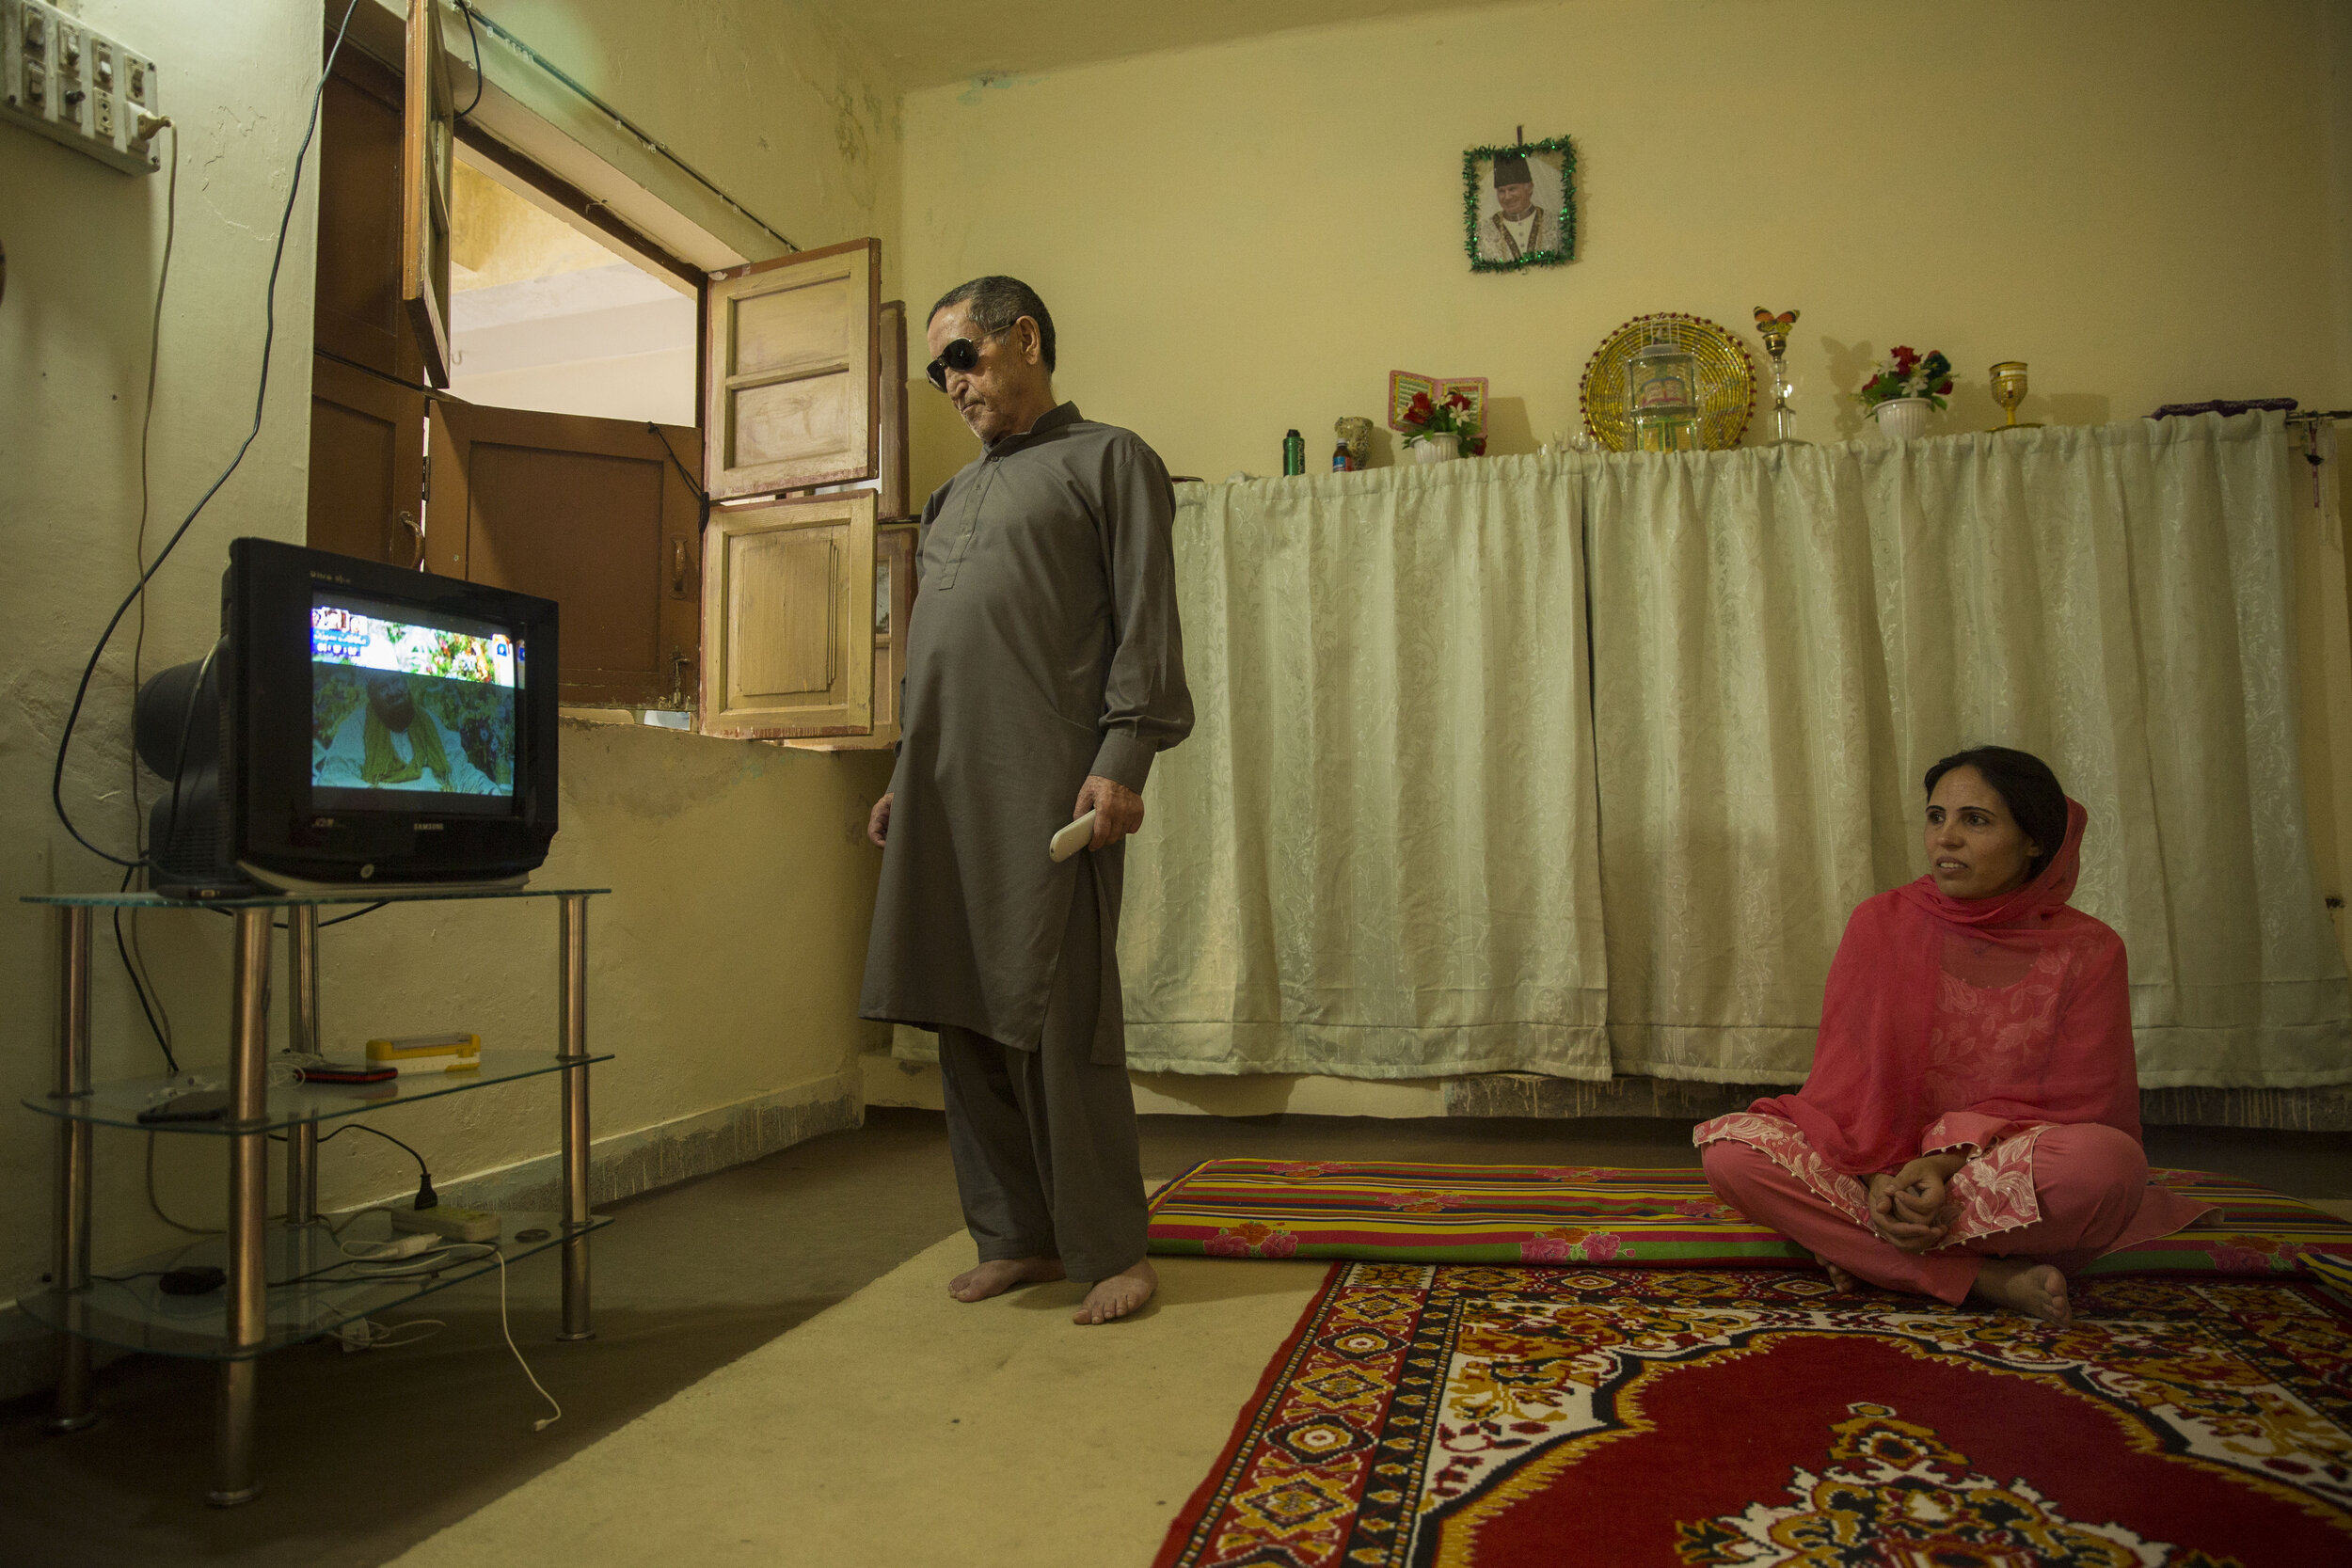  Nusrat Bibi, watches television with her father Dost Ali who has been ill for many years. 